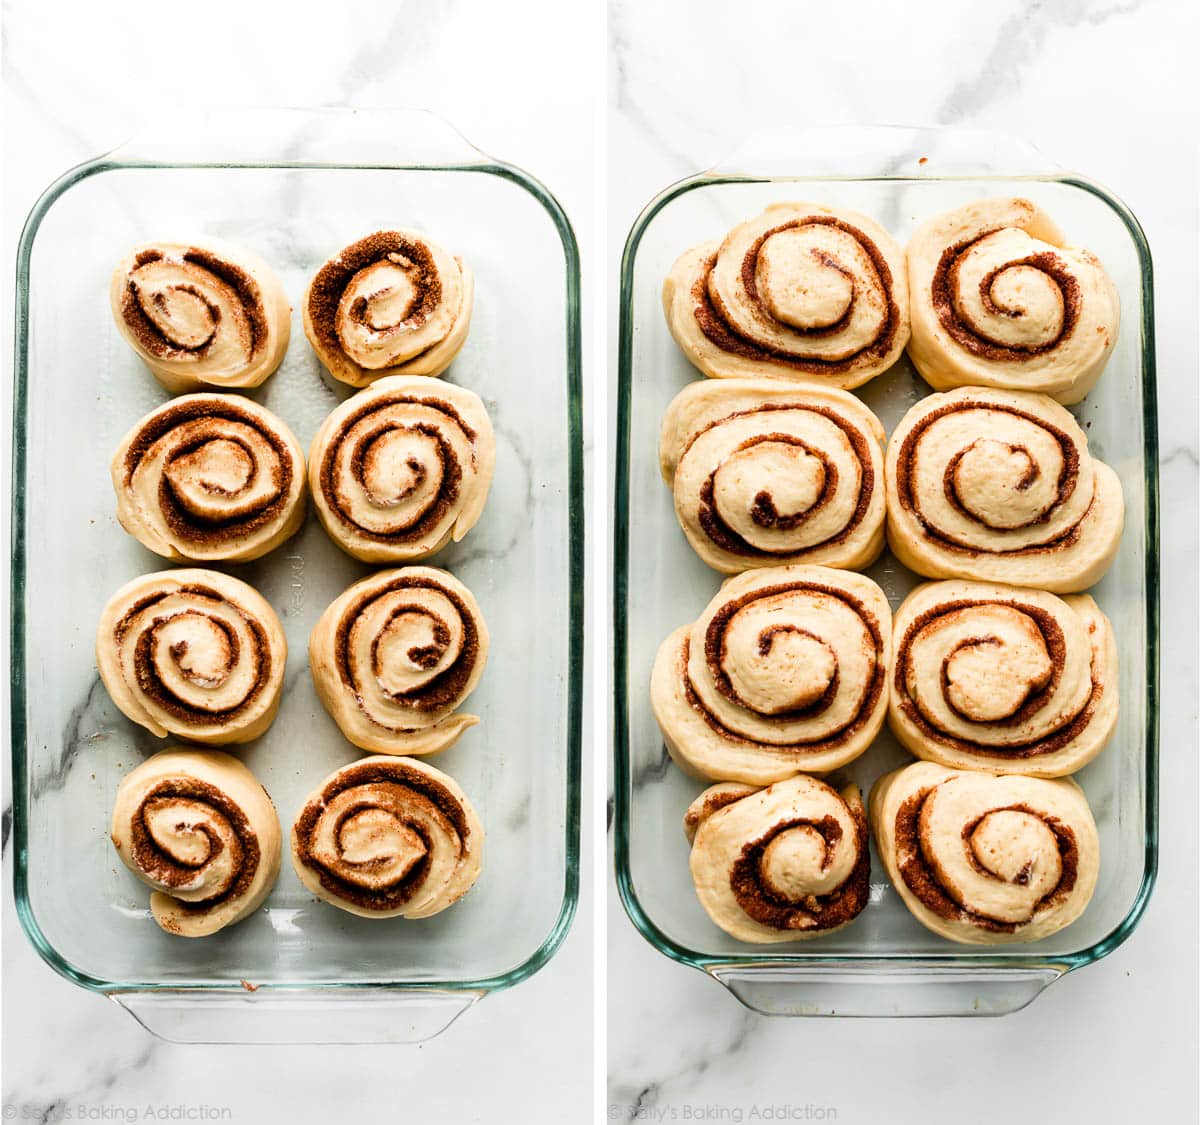 giant cinnamon rolls before and after rising